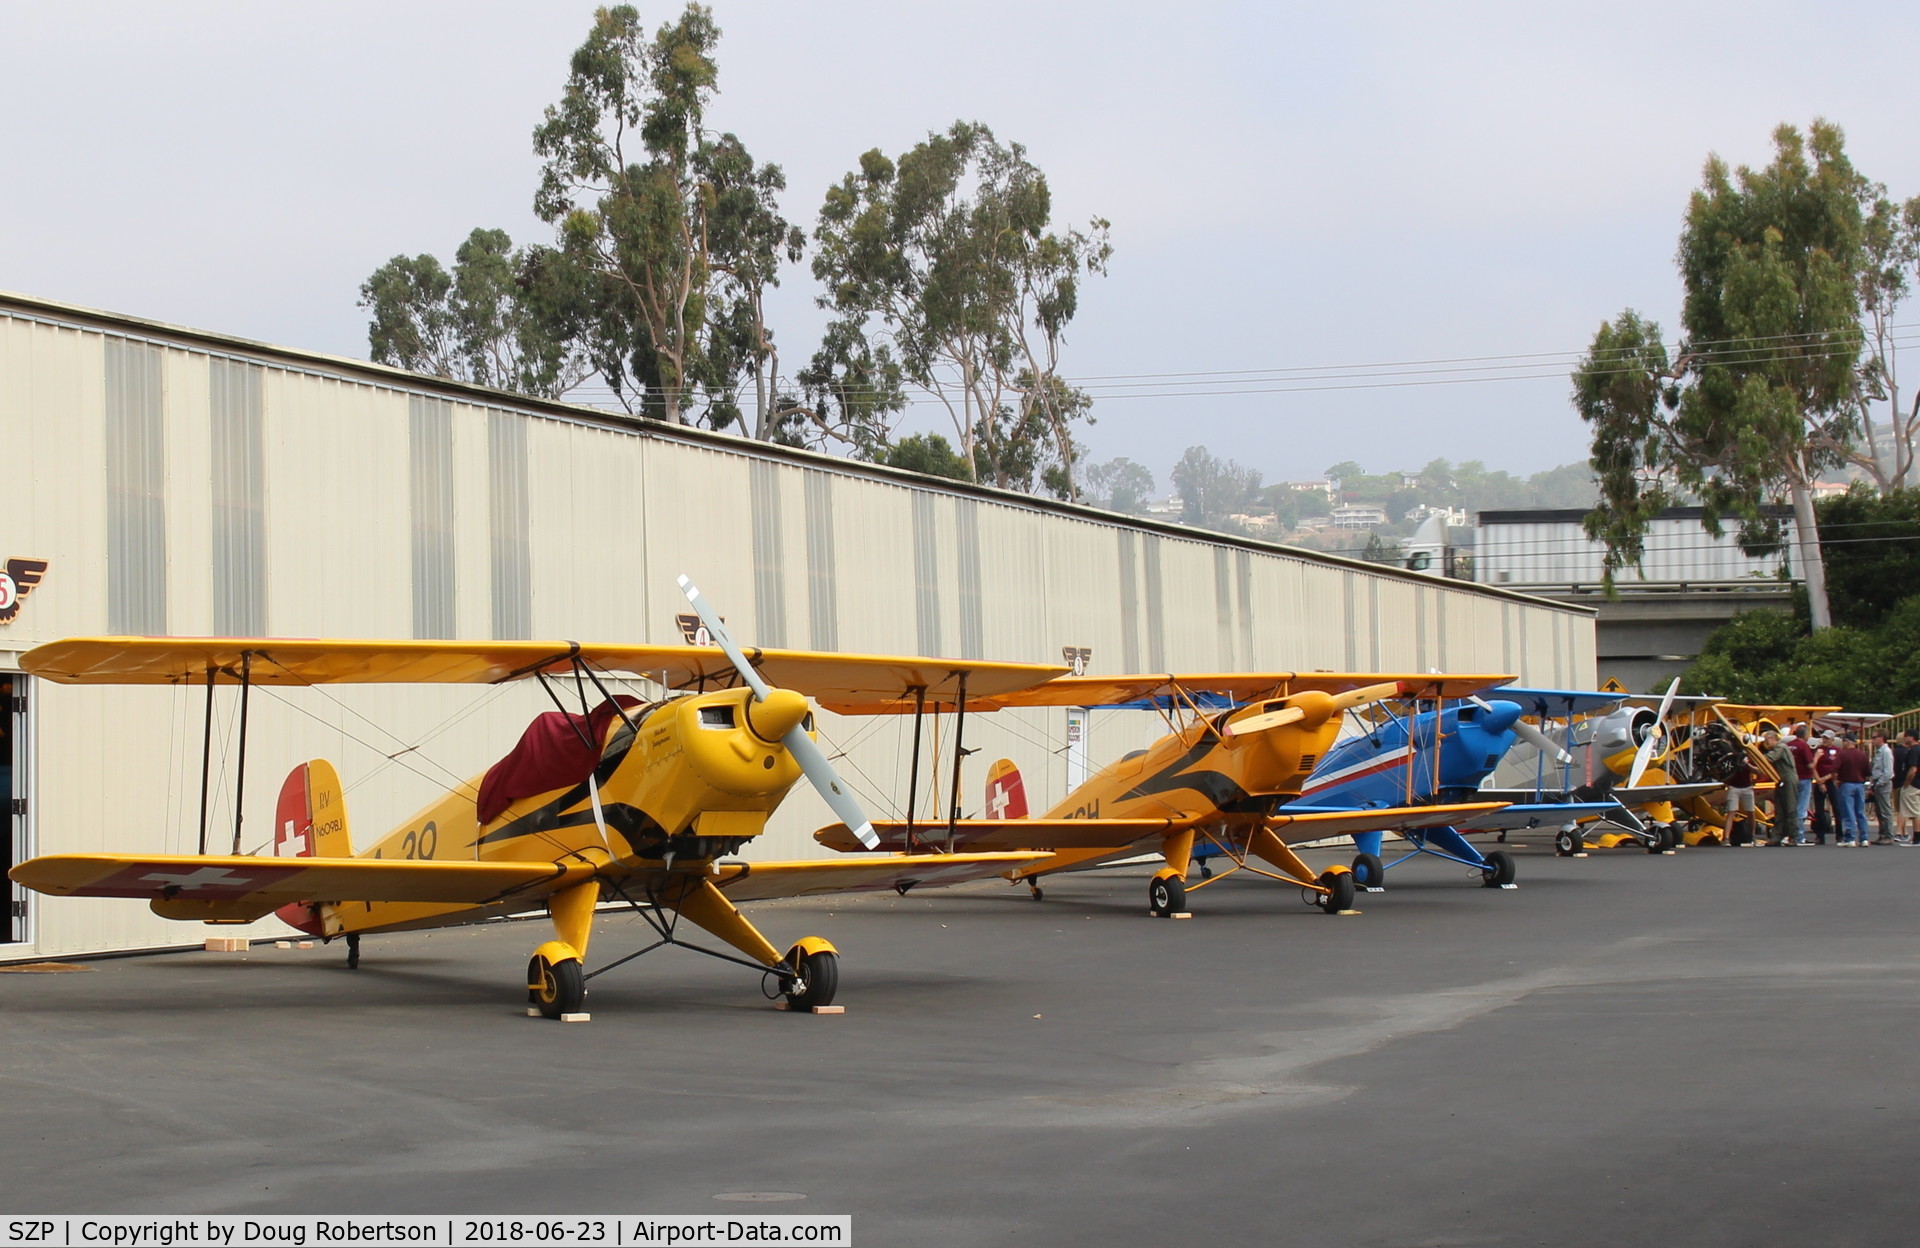 Santa Paula Airport (SZP) - A gathering of Bucker JungManns and JungMeisters; individual photos will also be uploaded.